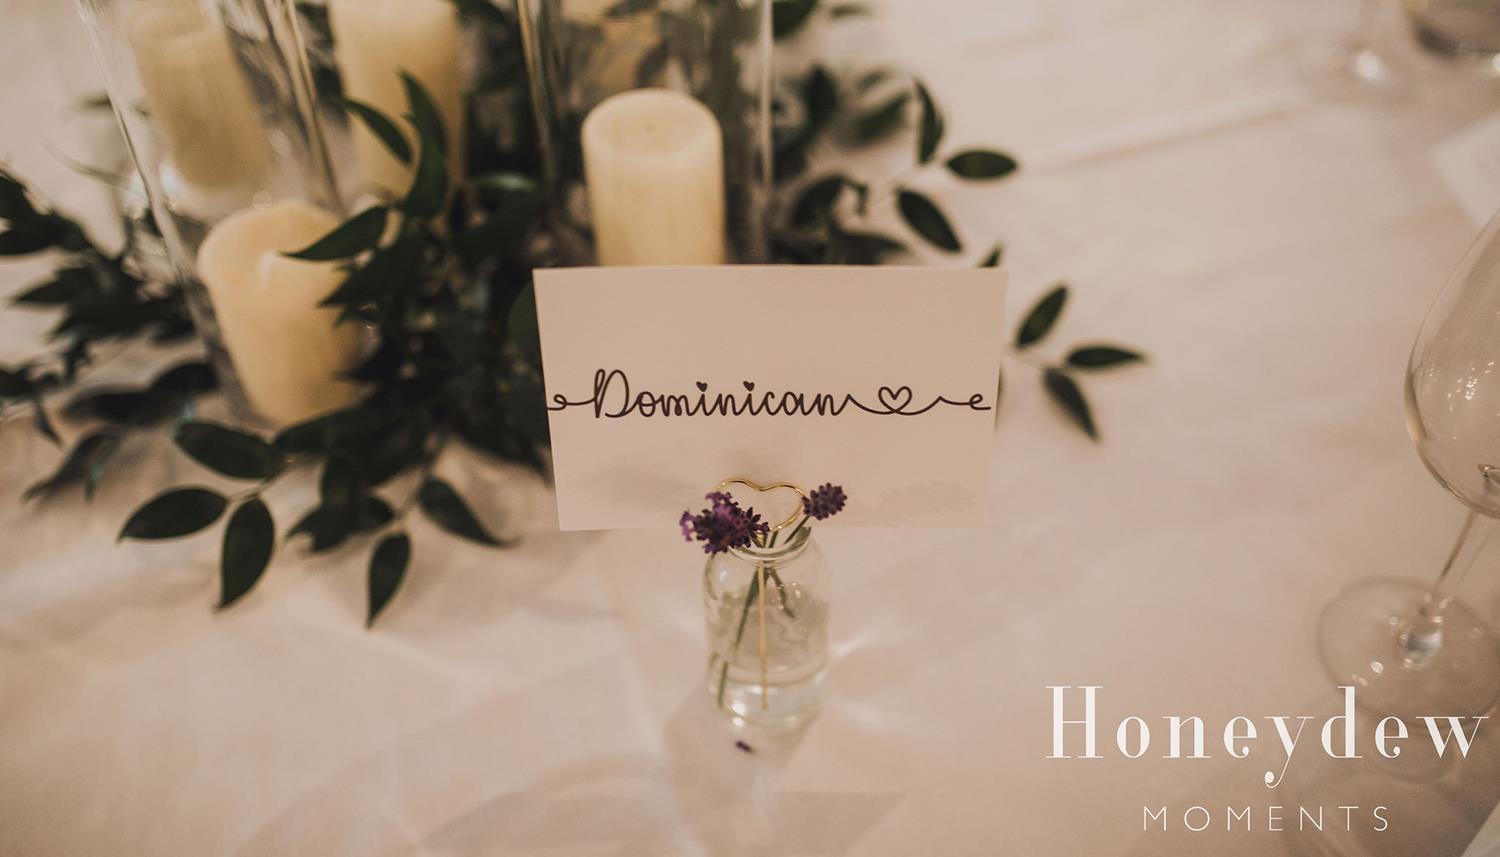 Place setting. Photo Credit: Honeydew Moments